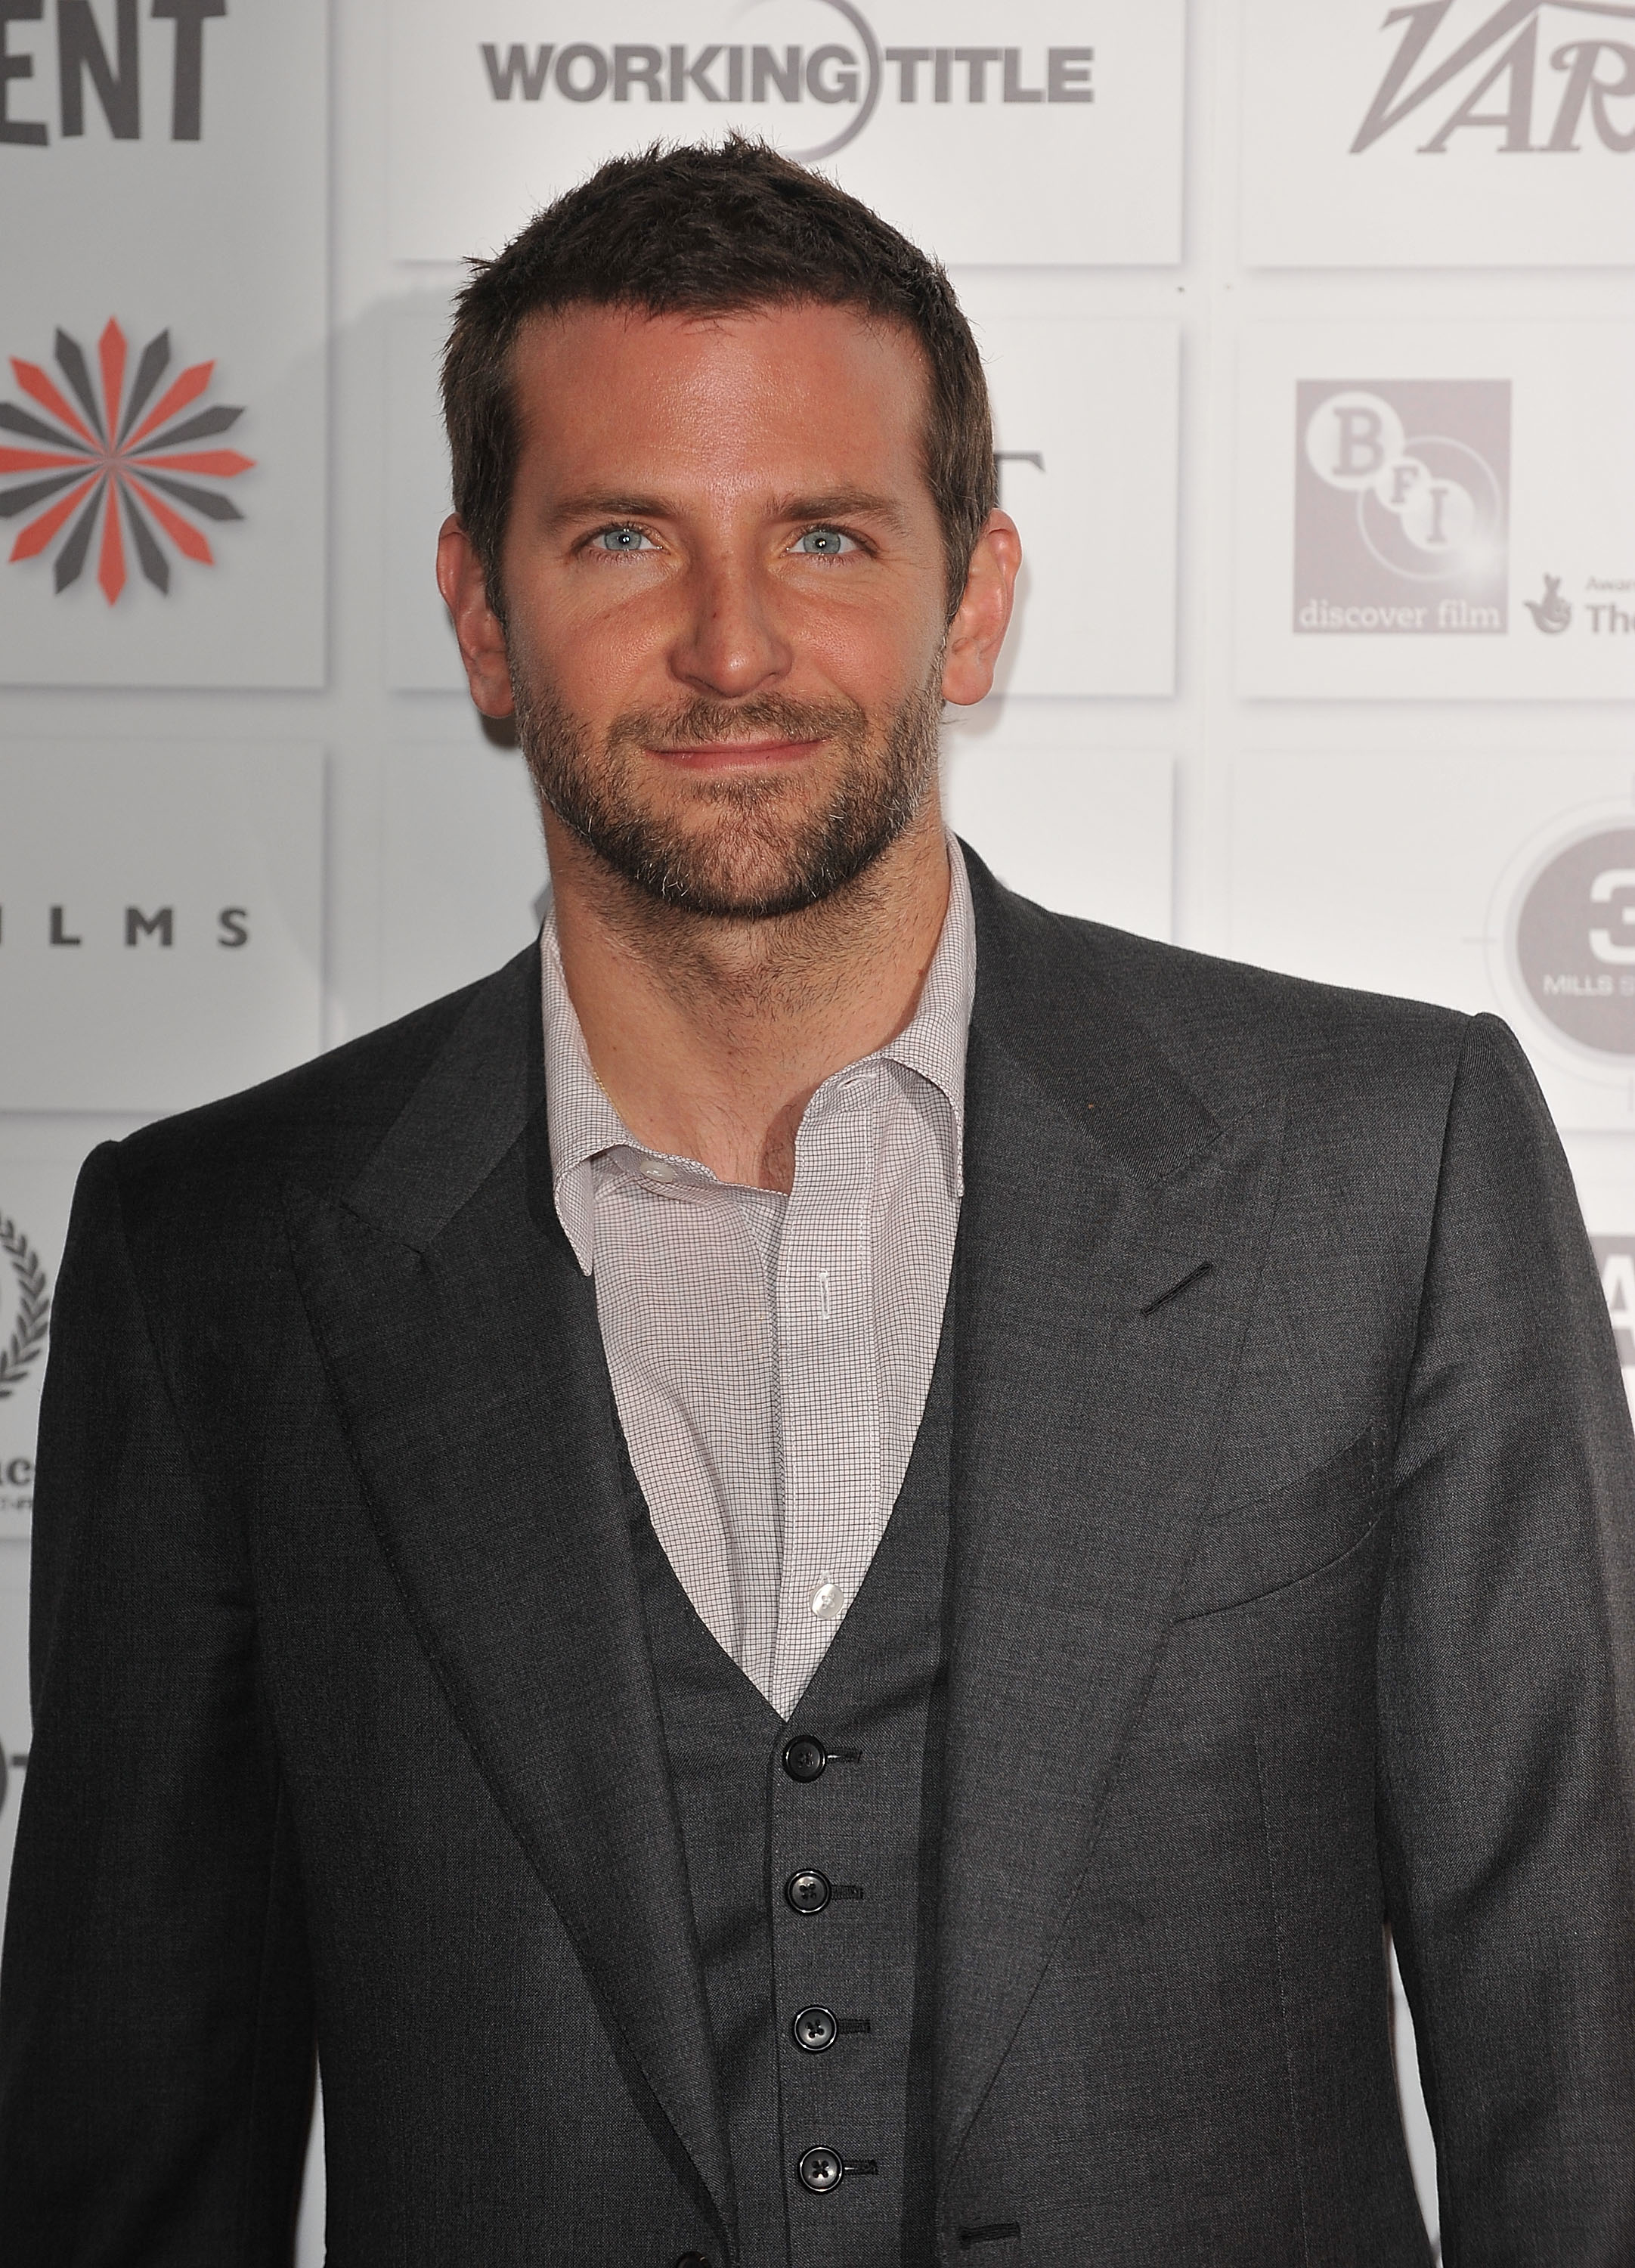 Close-up of Bradley smiling in a three-piece suit at a media event